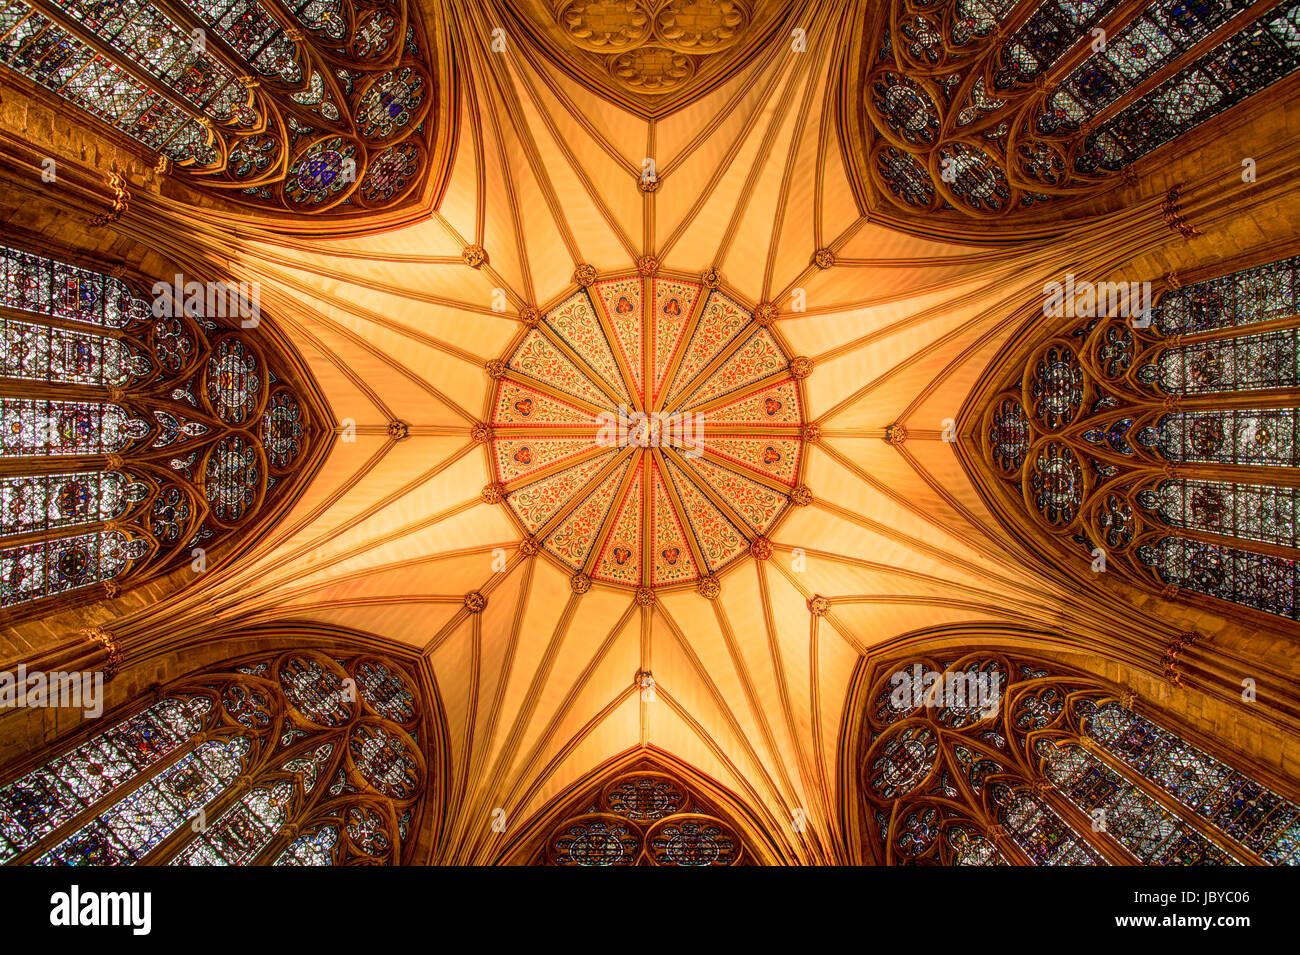 Looking up at the marvelous ornate ceiling in the Chaptor House, York Minster.  Built between 1260 and 1280s. Stock Photo